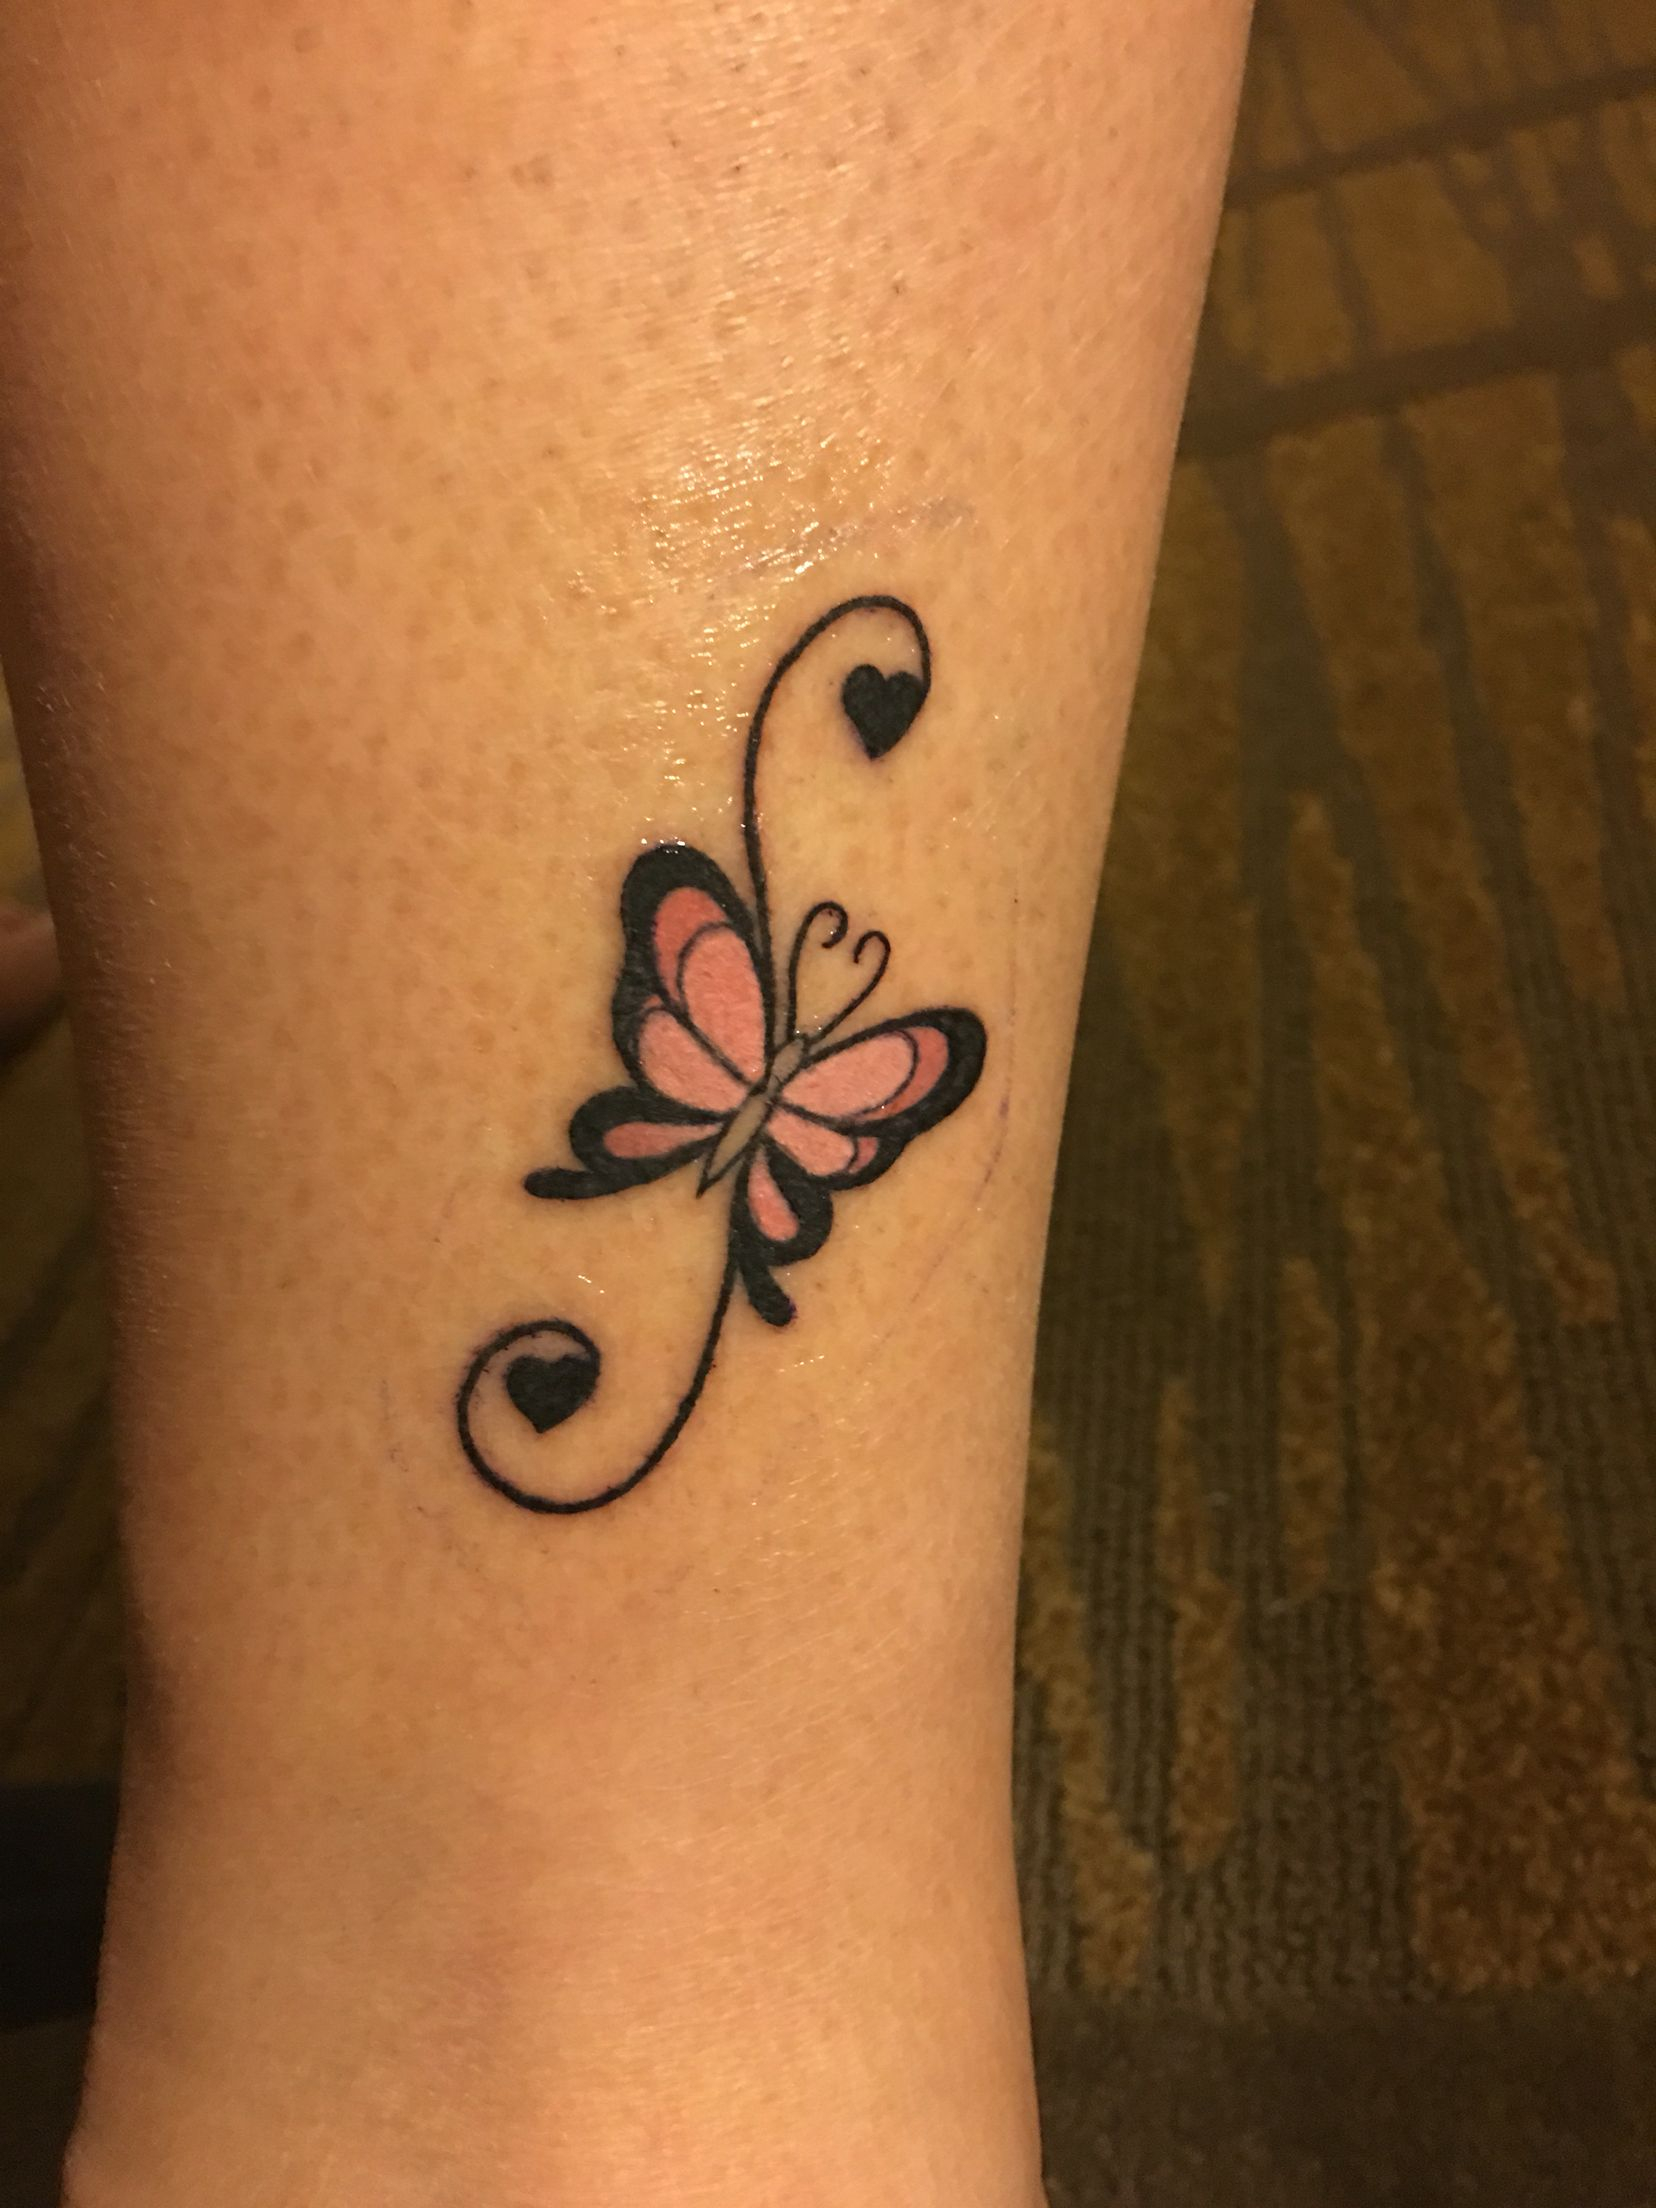 Feminine Butterfly Tattoo The Ankle With Swirls And Hearts The throughout size 1656 X 2208